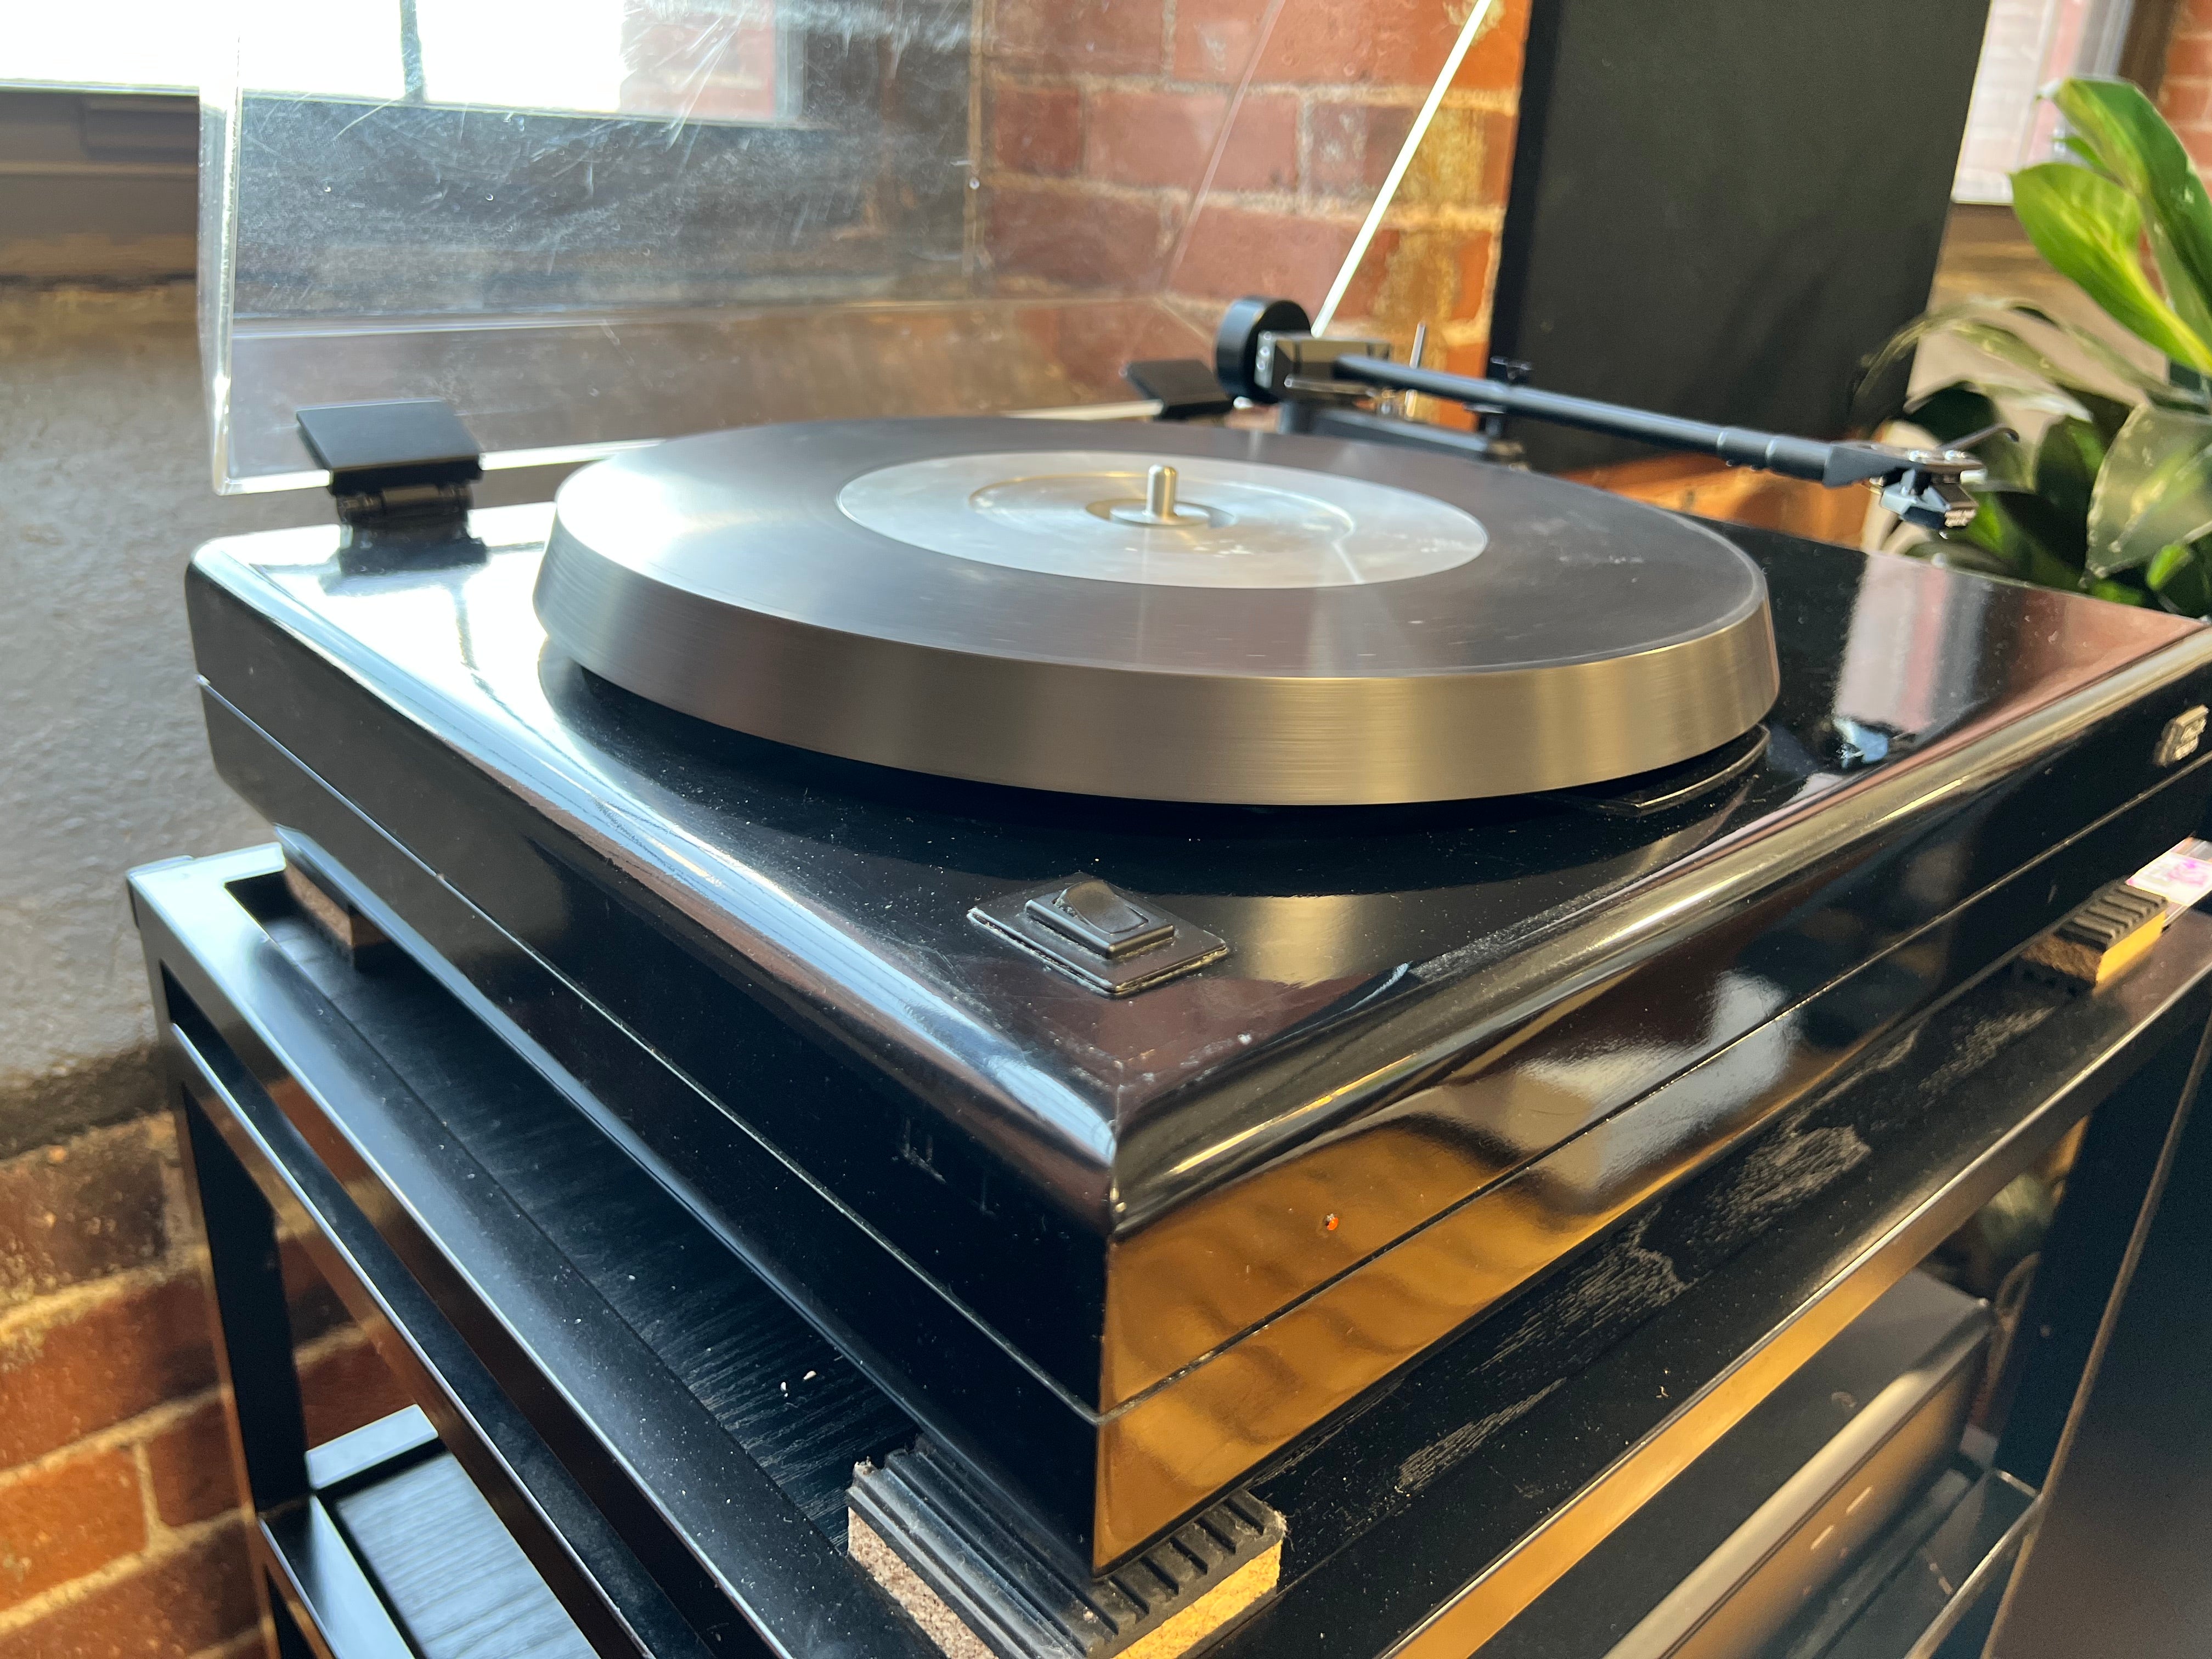 Acoustic Research ES-1 Turntable, New Music Hall Spirit Cart, Linn Basik+ Arm - SOLD